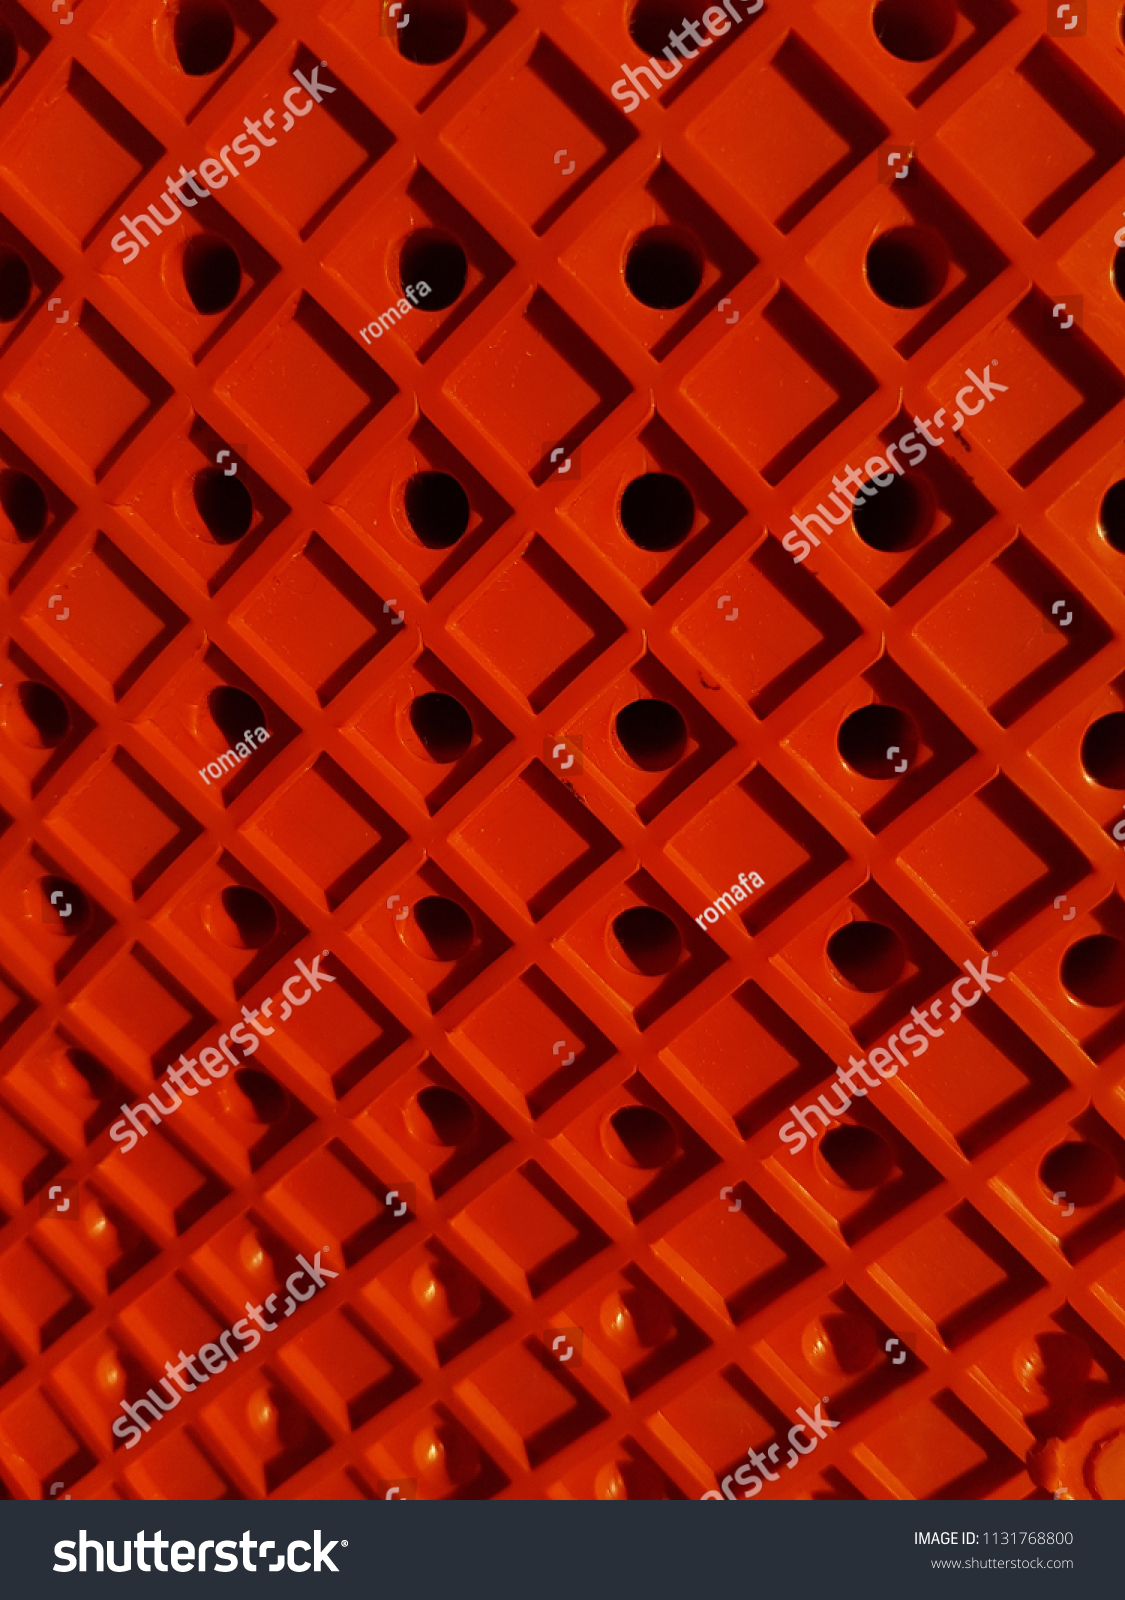 Red grid, lines in the form of a square. Pattern background, texture. #1131768800